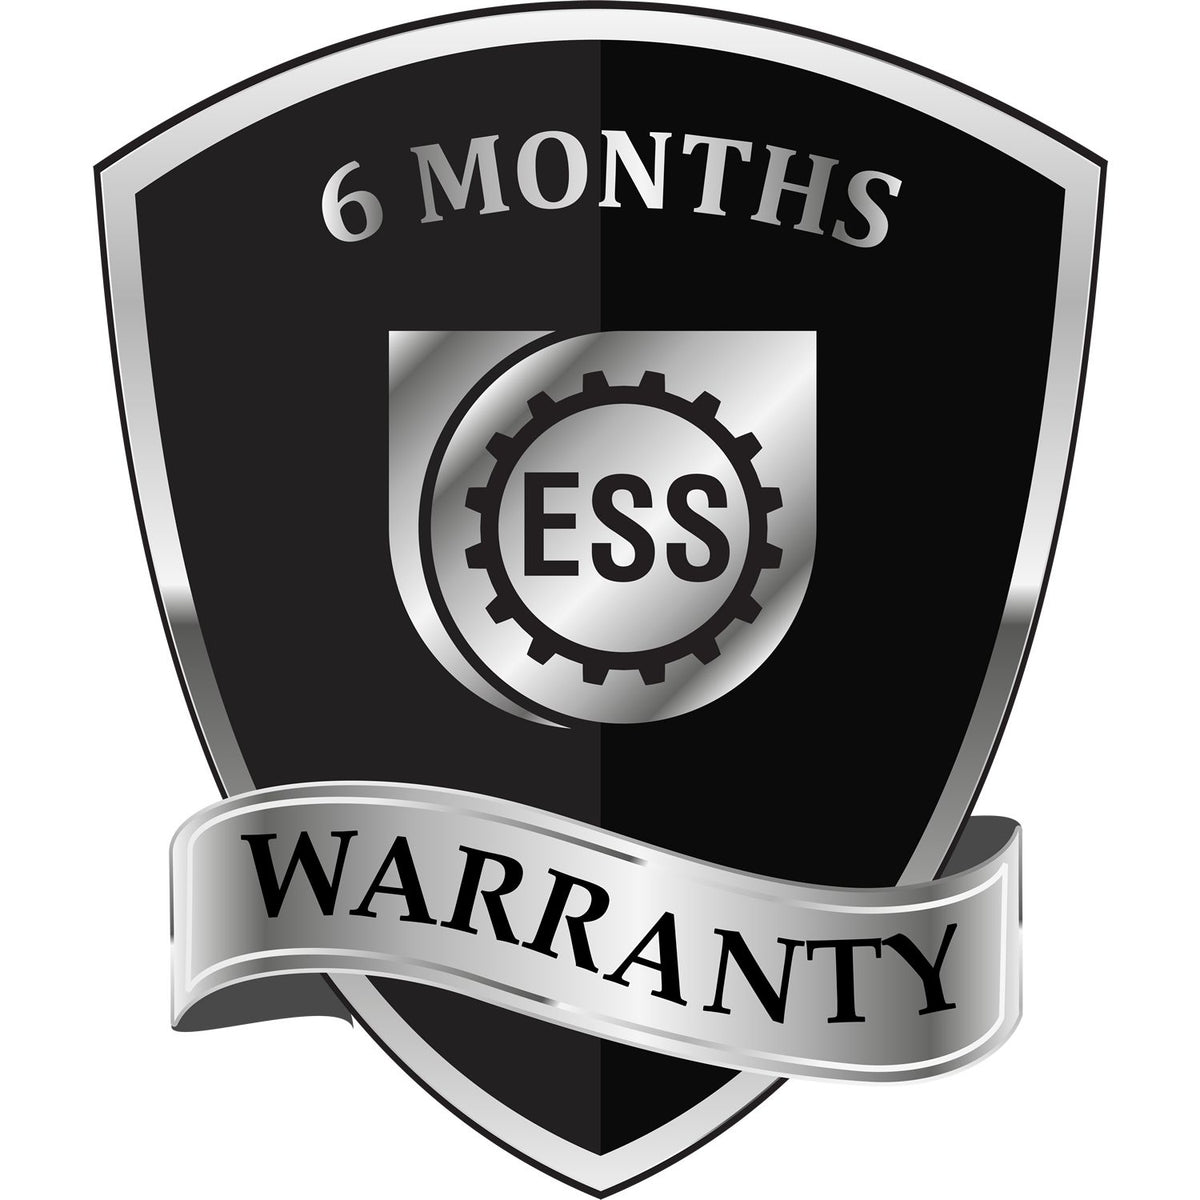 A badge or emblem showing a warranty icon for the Nebraska Professional Engineer Seal Stamp